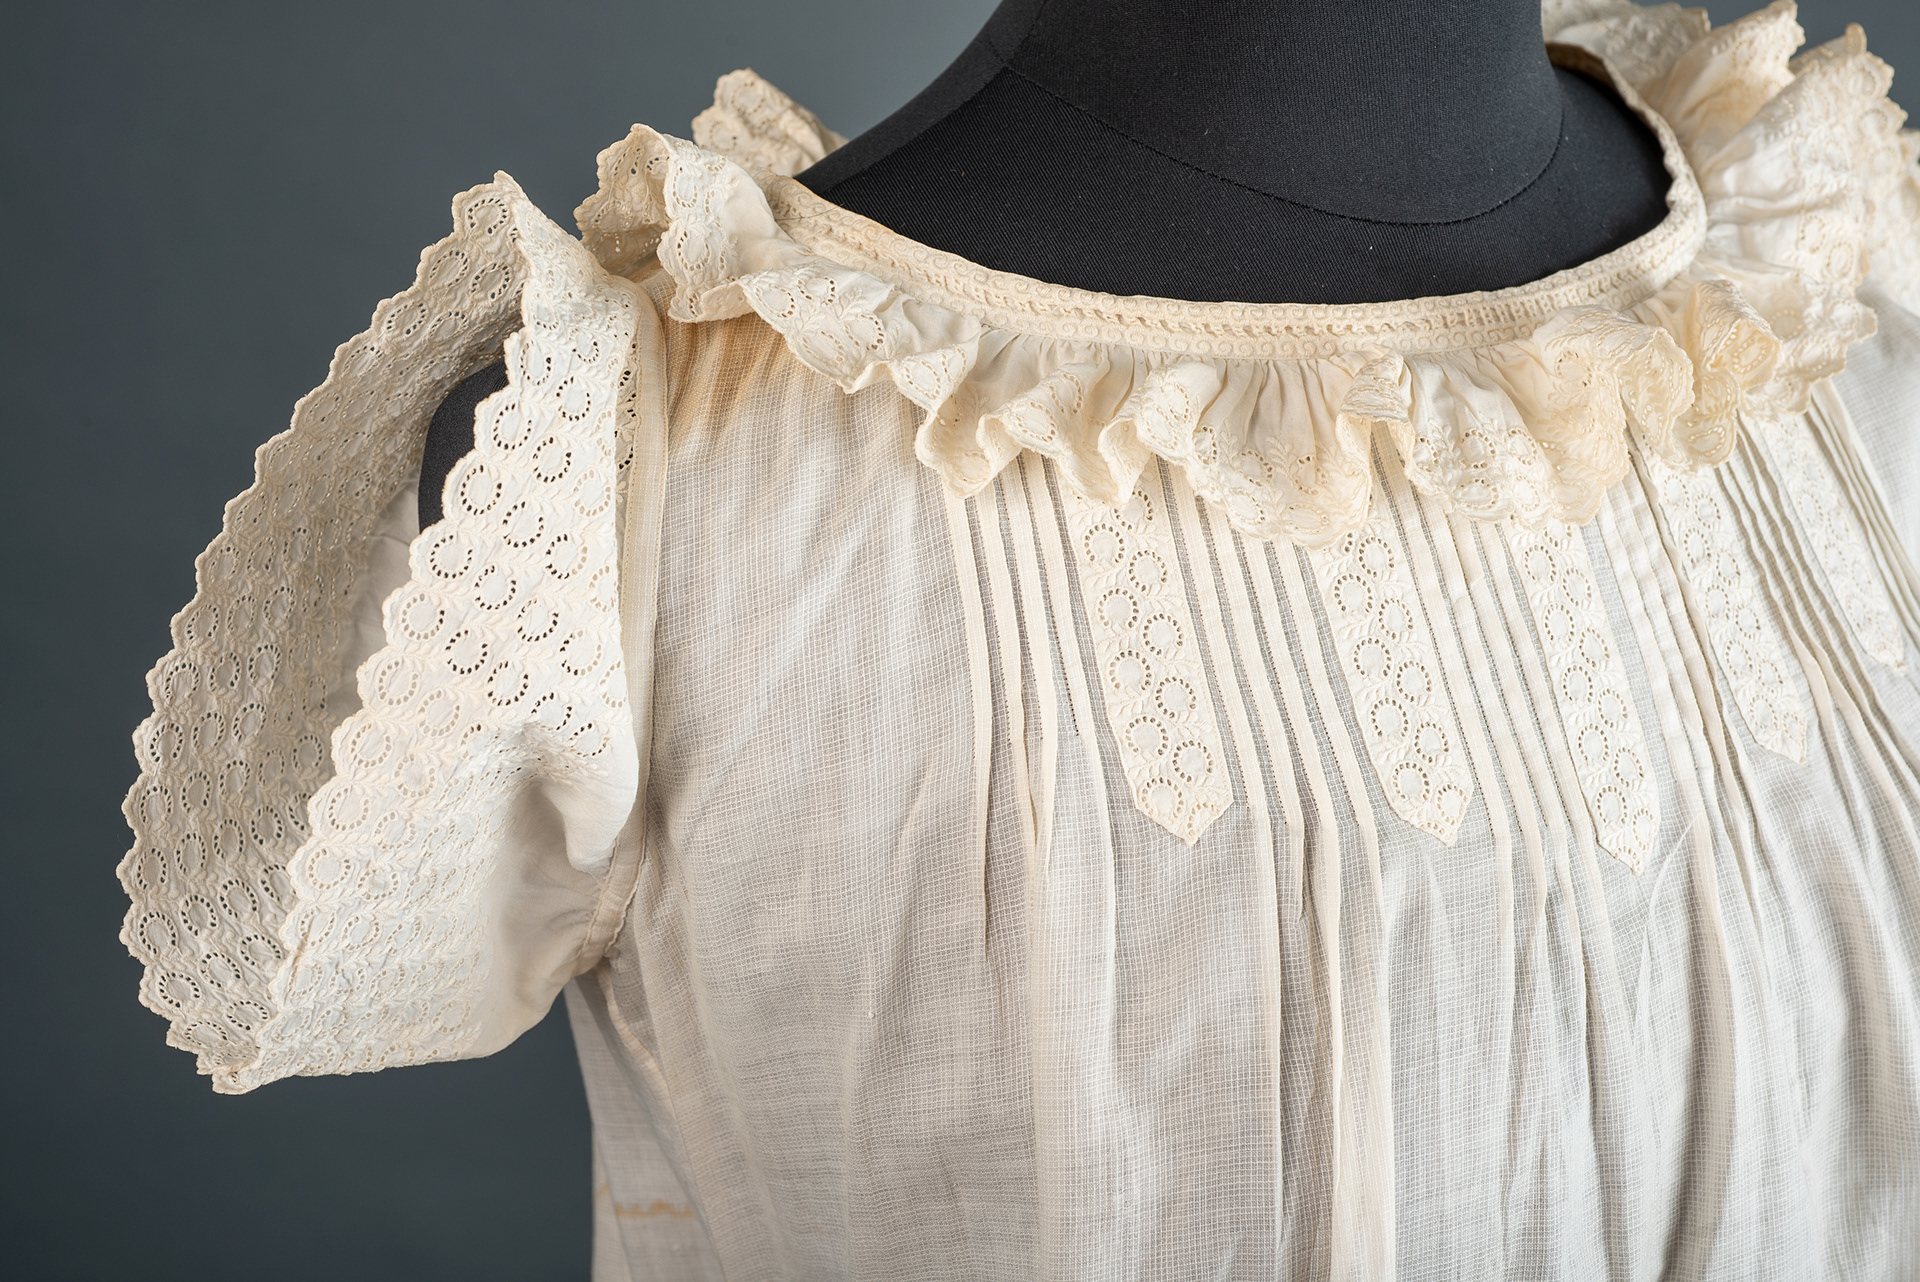 Wearable History - Dolly Varden and Bed Gown